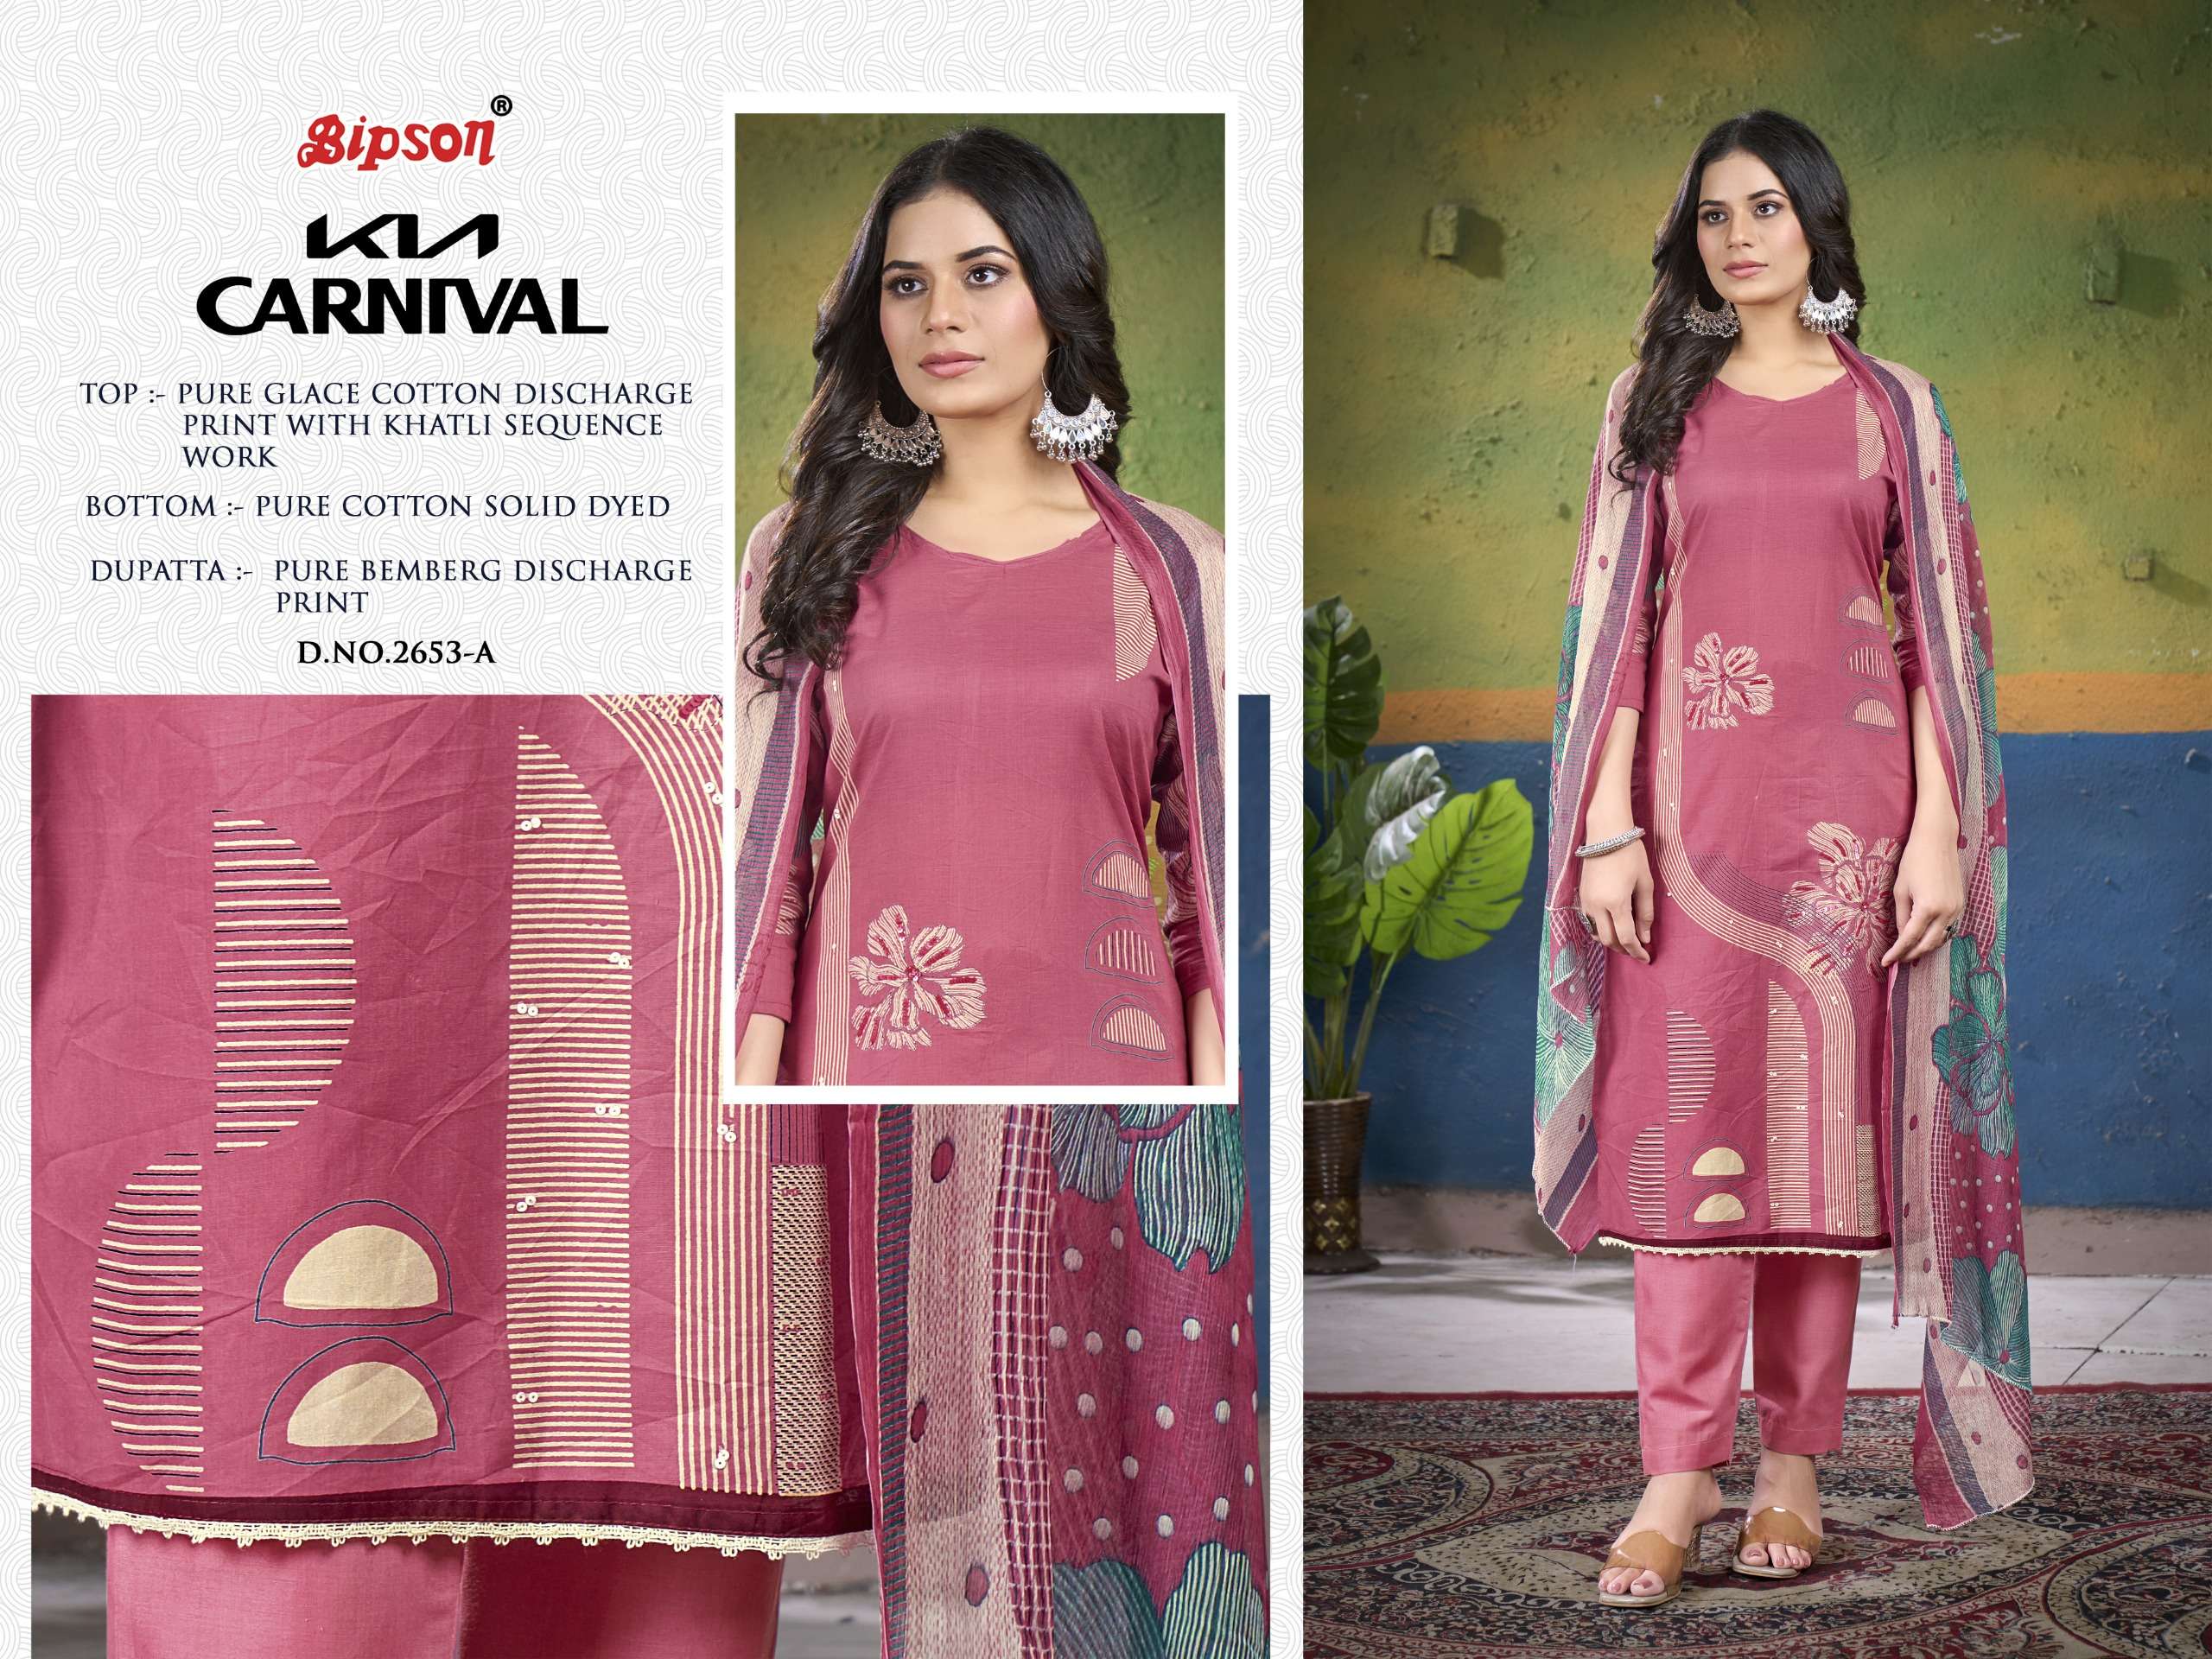 bipson kia carnival 2653 galce cotton catchy look salwar suit catalog